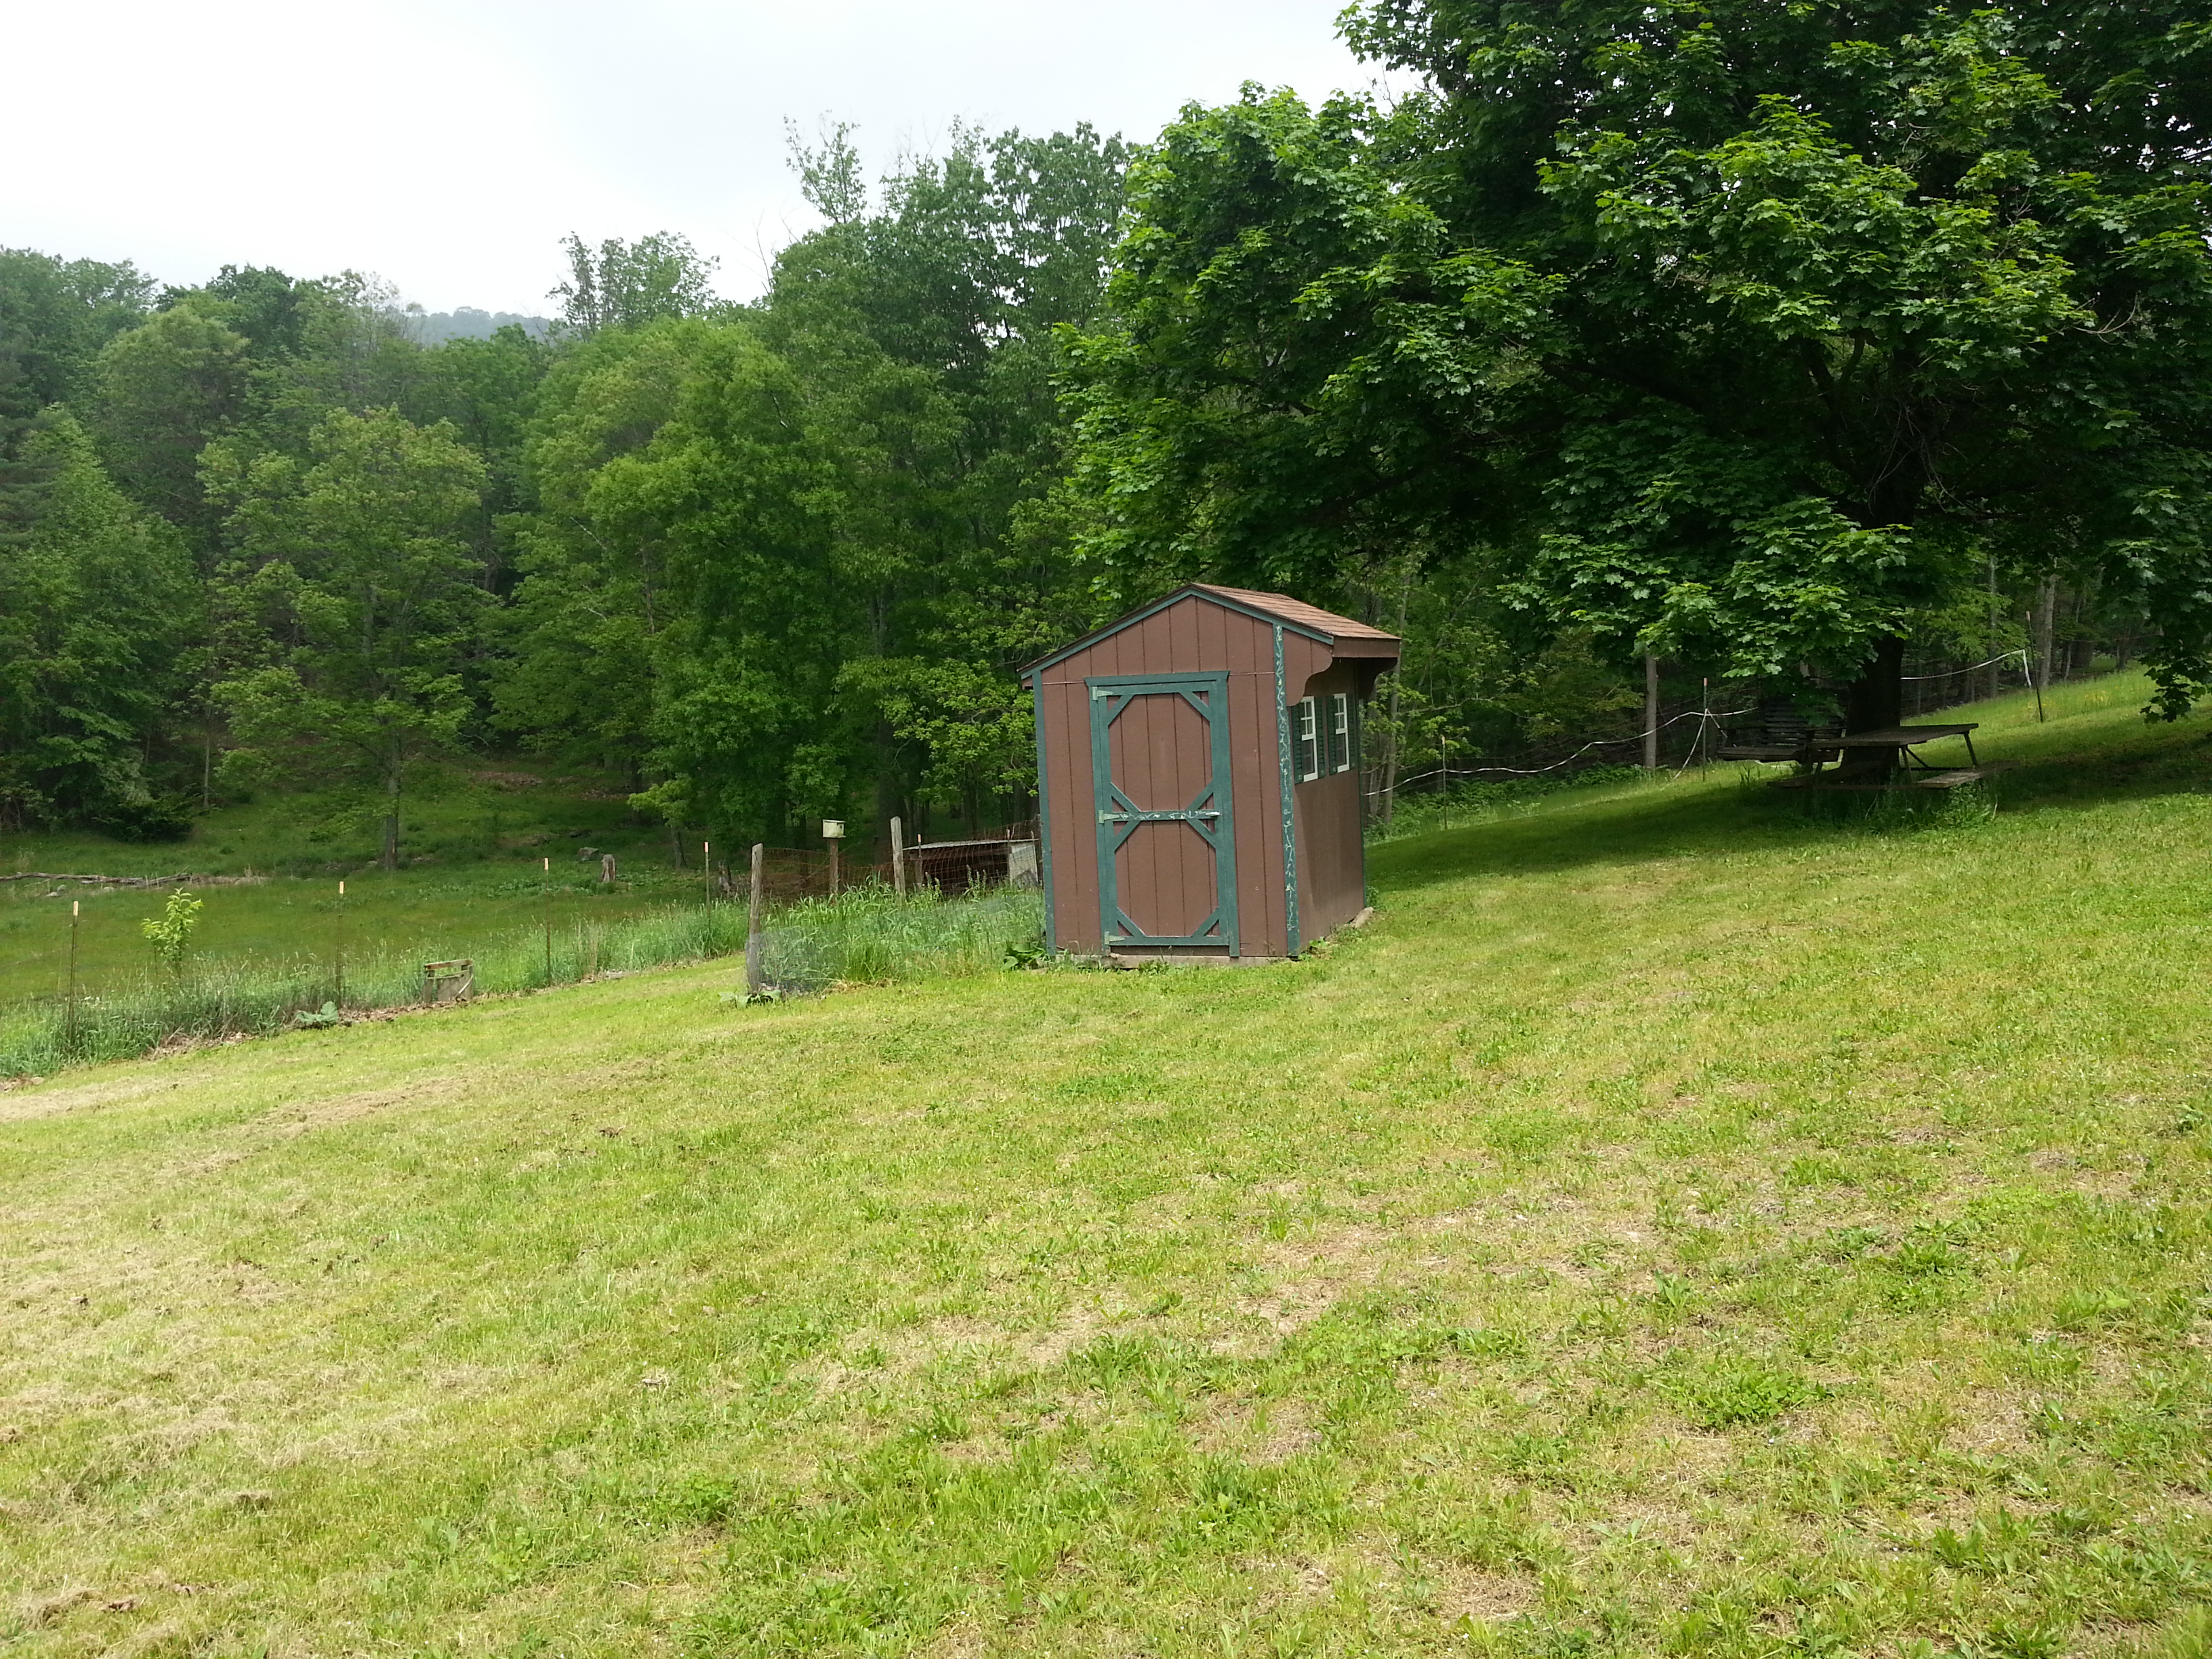 Chicken coop that needs a larger fenced in area!